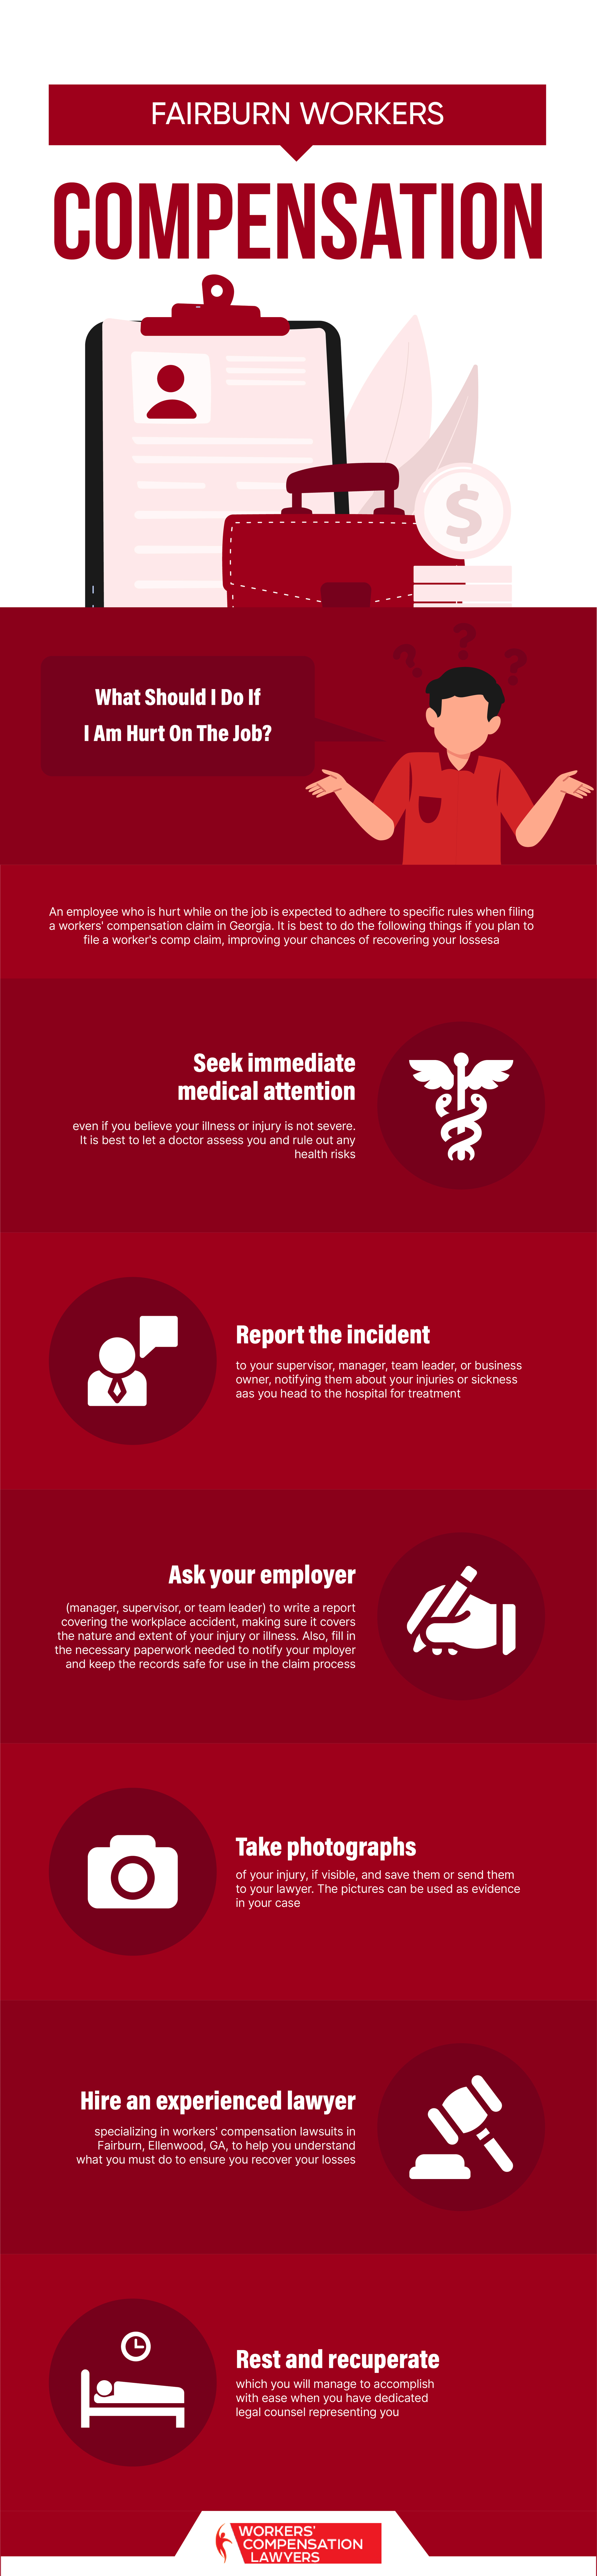 Fairburn Workers Compensation Infographic